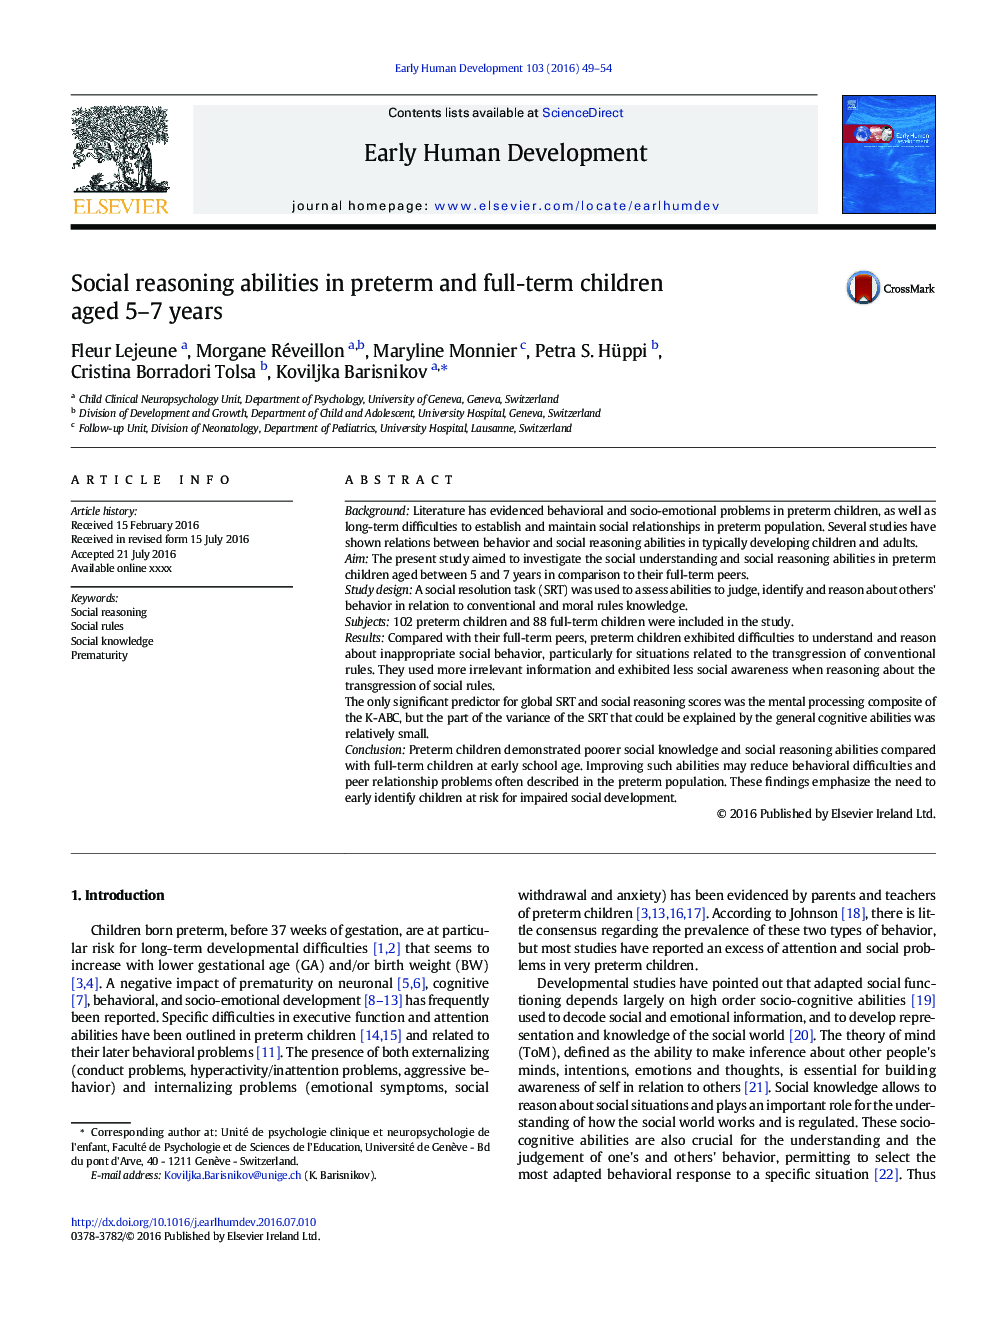 Social reasoning abilities in preterm and full-term children aged 5–7 years